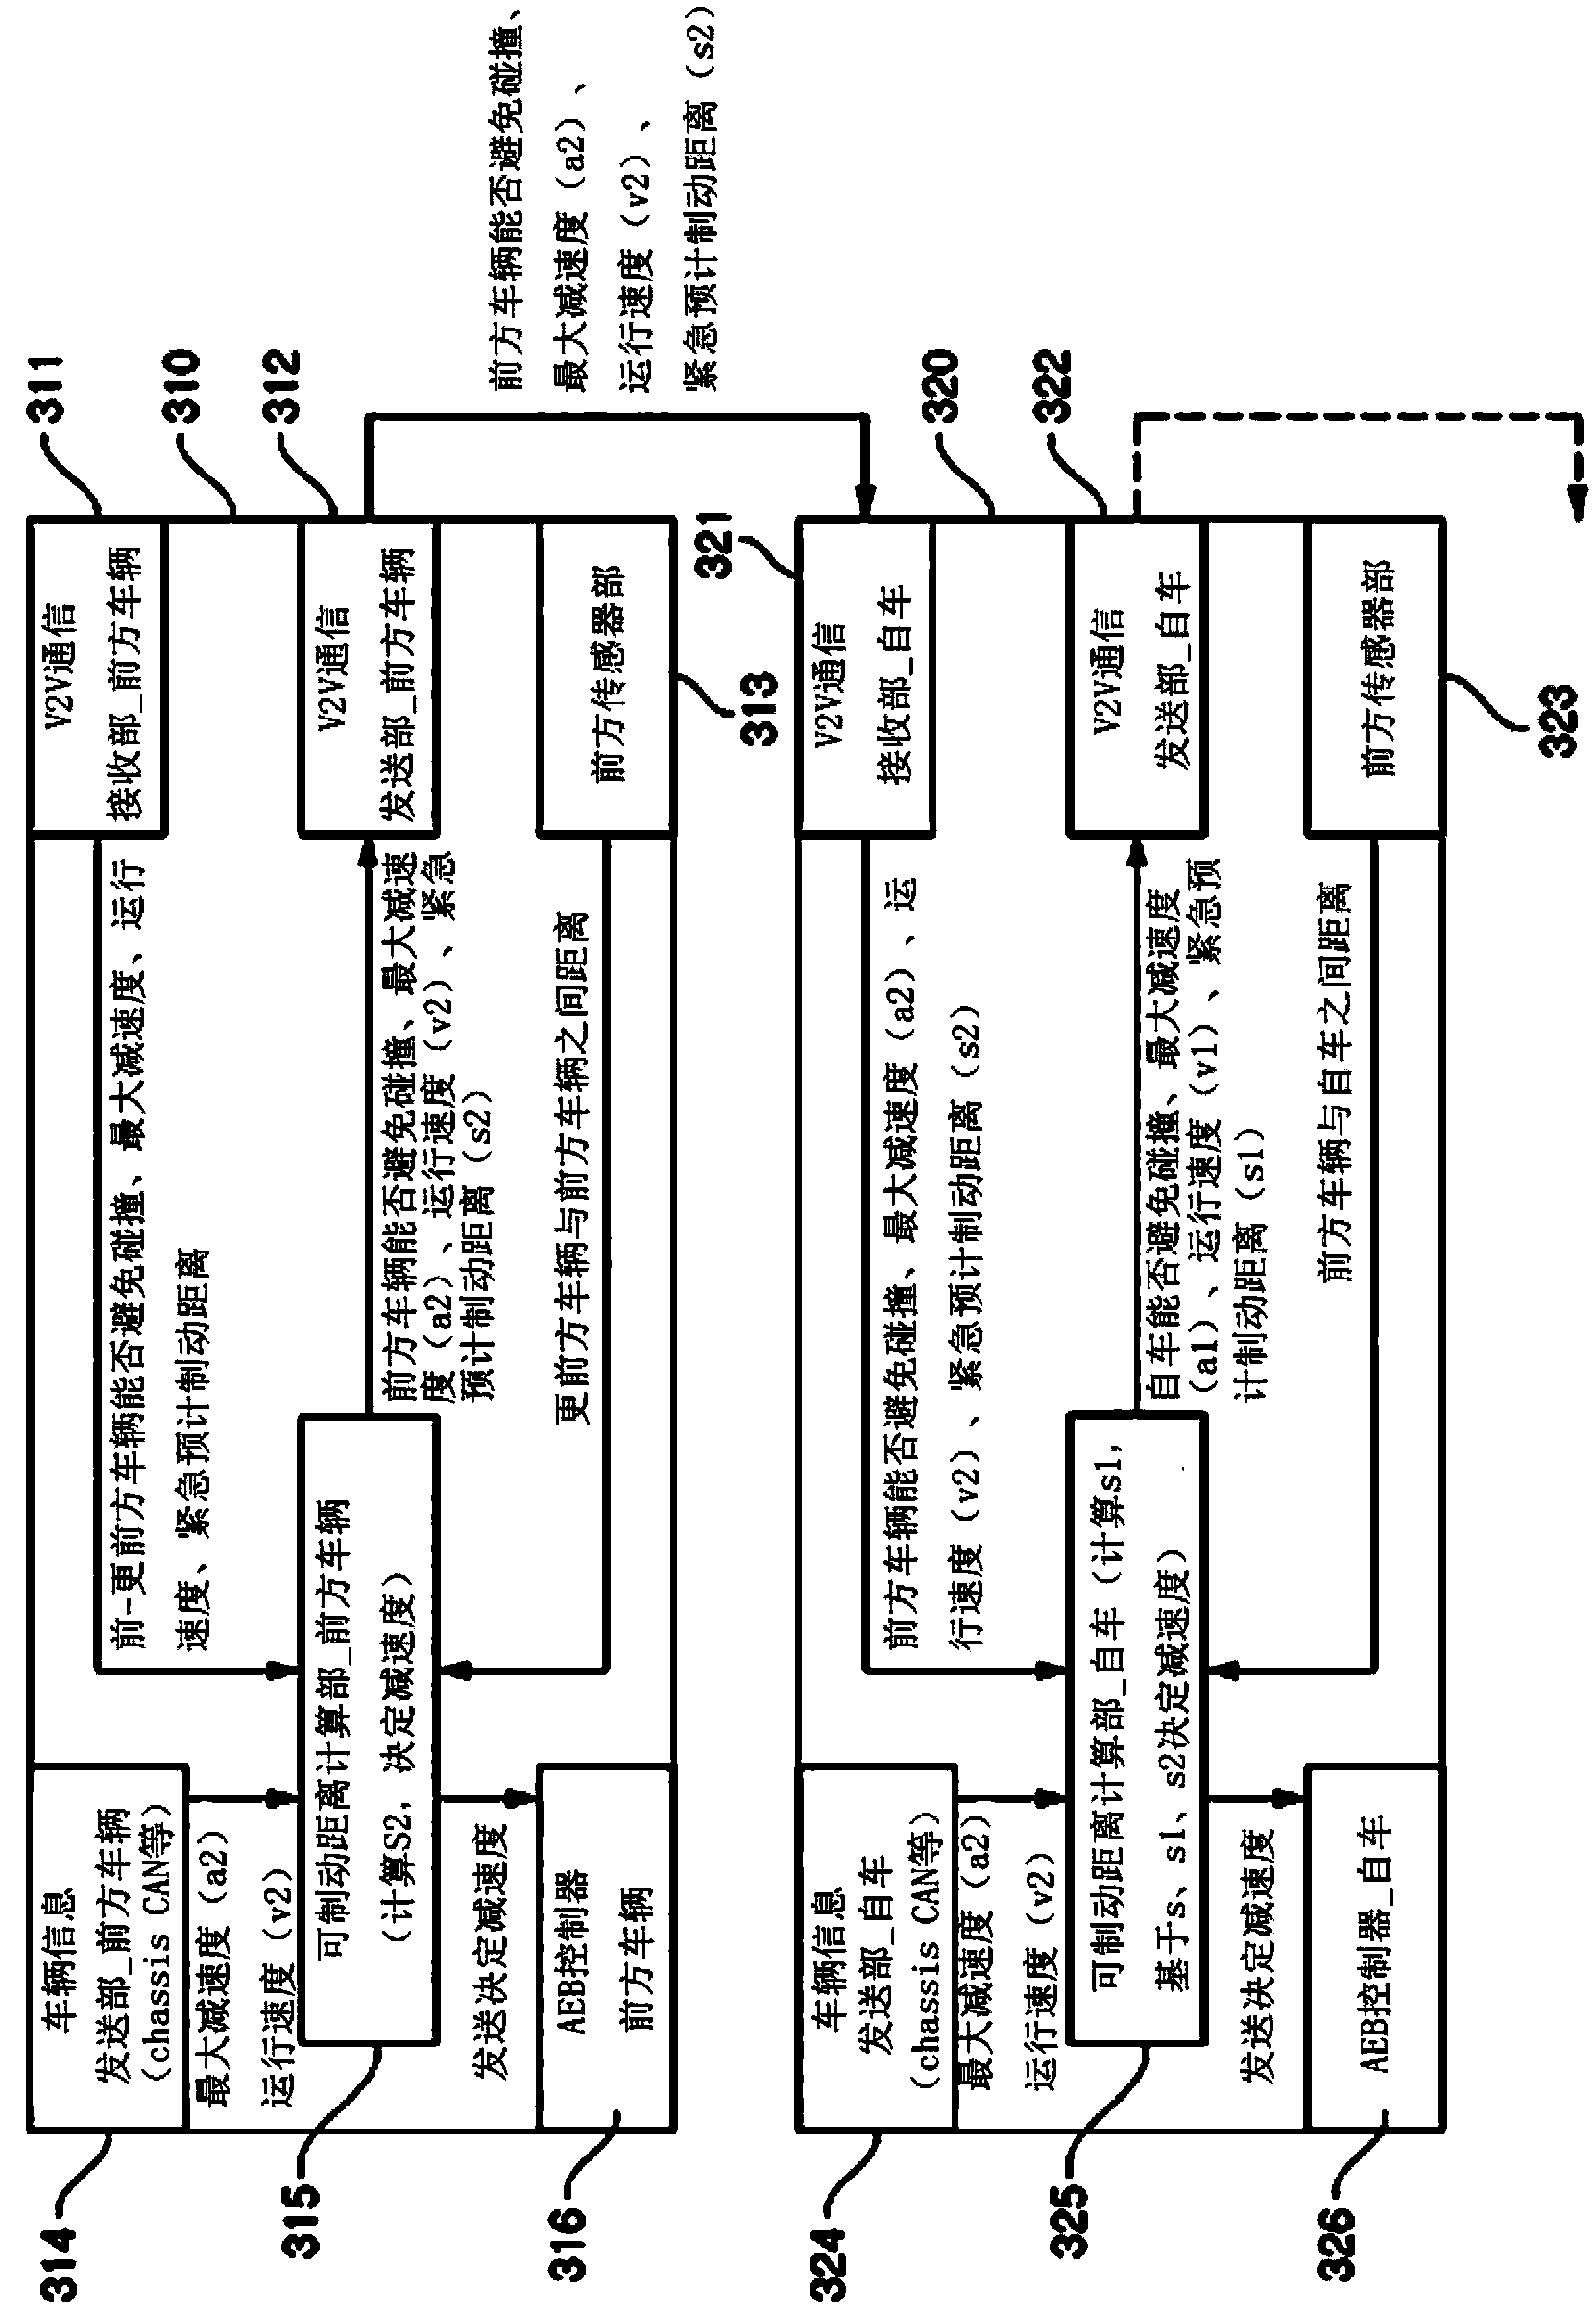 AEB control apparatus and method based on communication between vehicles